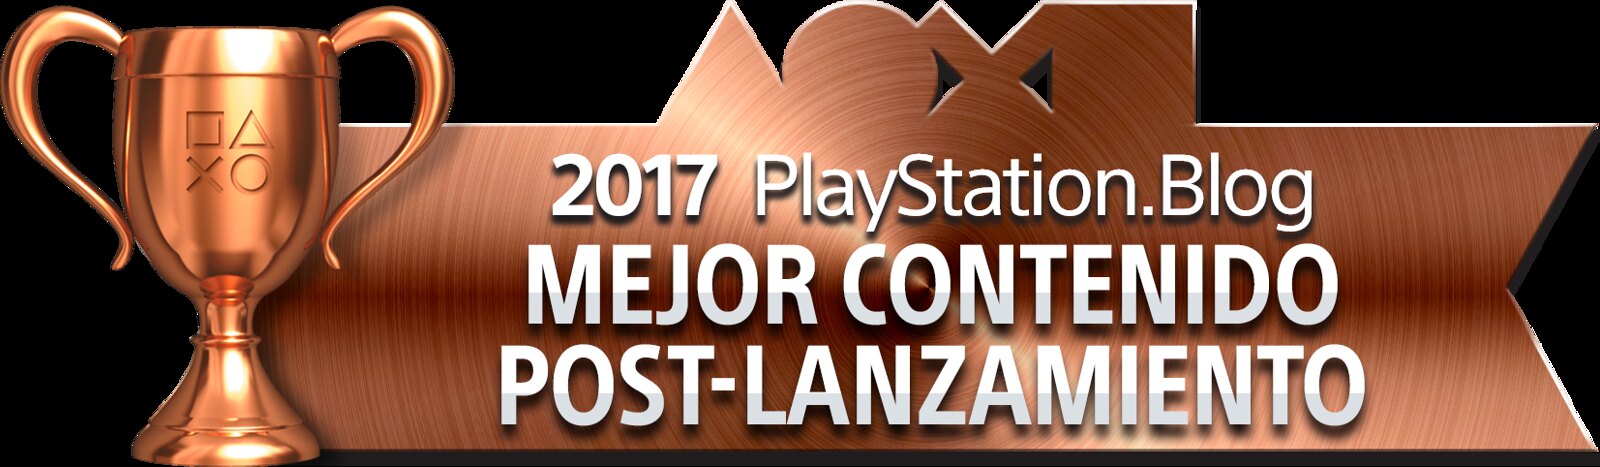 PlayStation Blog Game of the Year 2017 - Best Post-Release Content (Bronze)